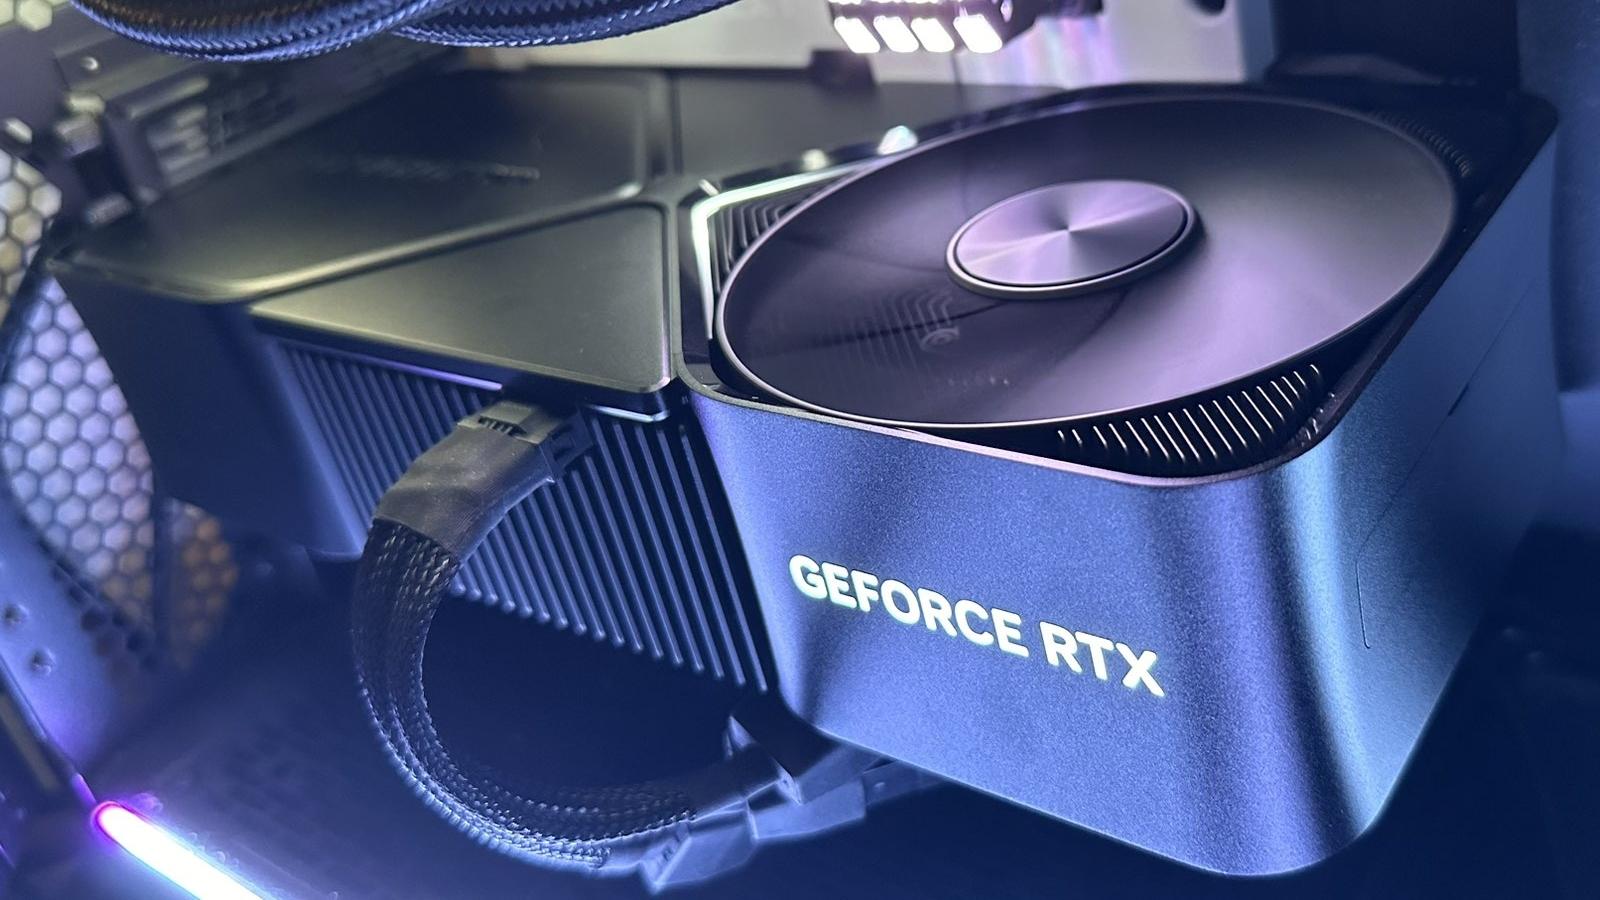 Nvidia GeForce RTX 4080 Super Founders Edition Review